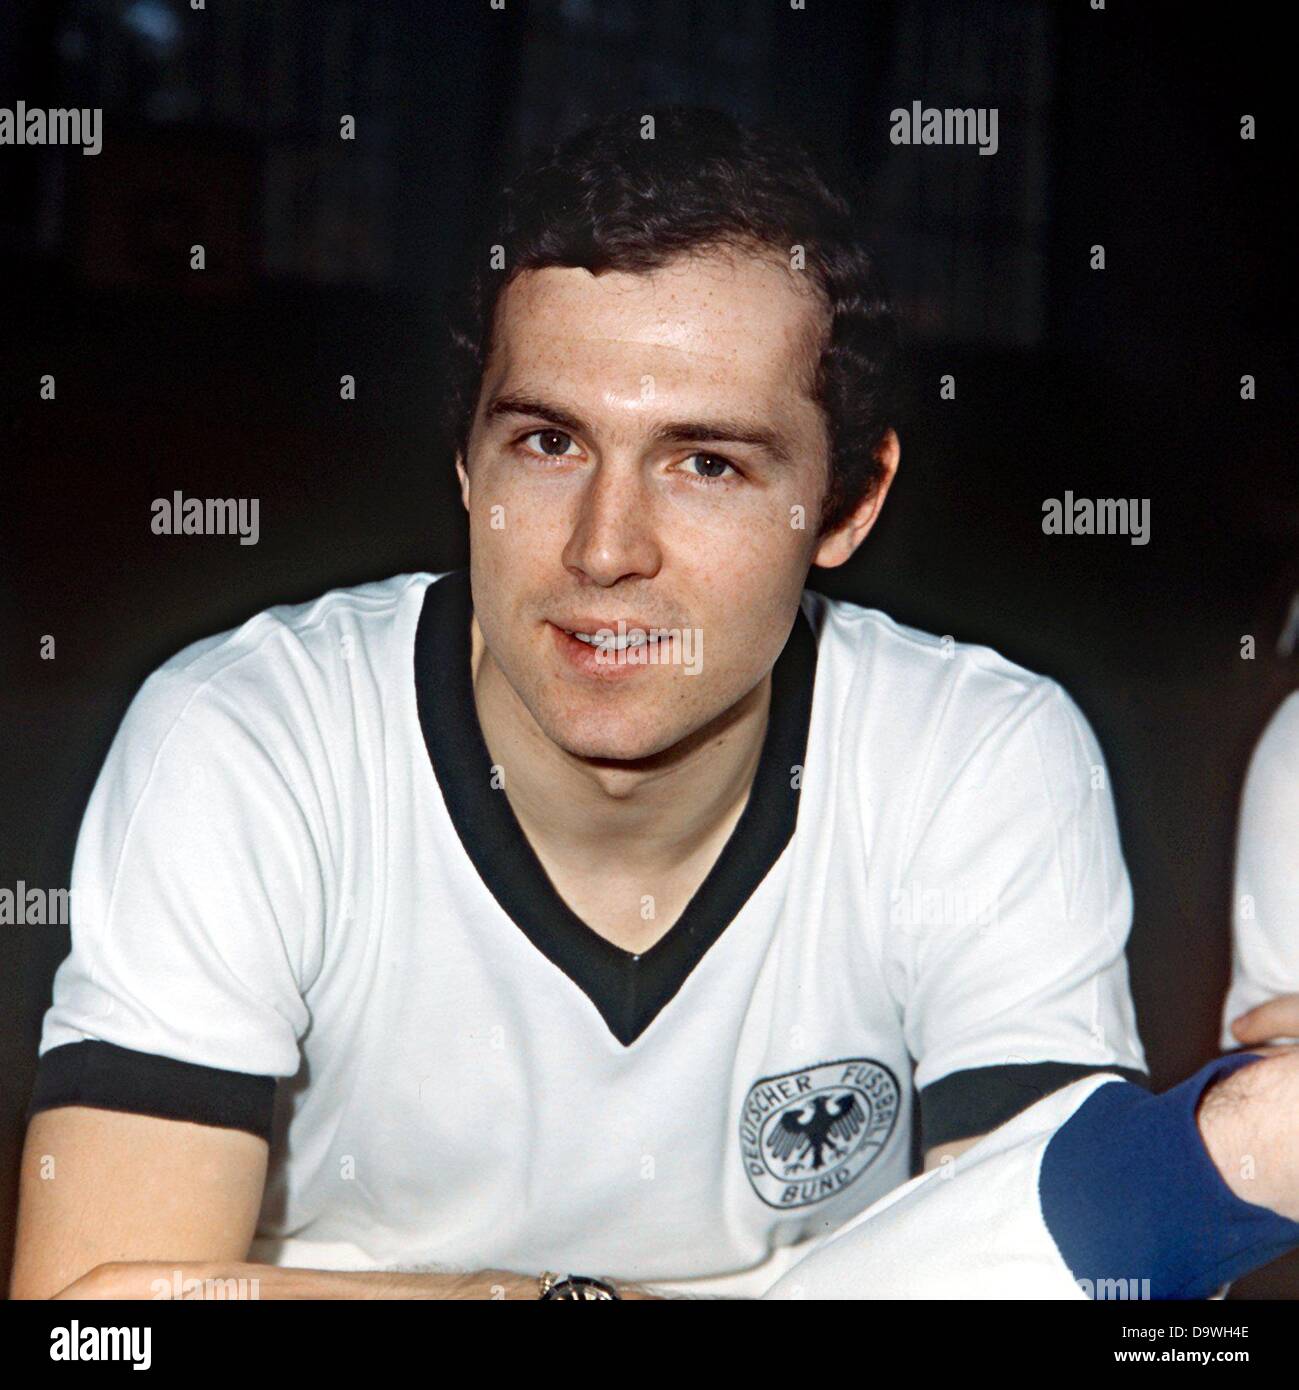 Franz Beckenbauer wearing the national team's jersey during his time as active player (undated picture). Stock Photo